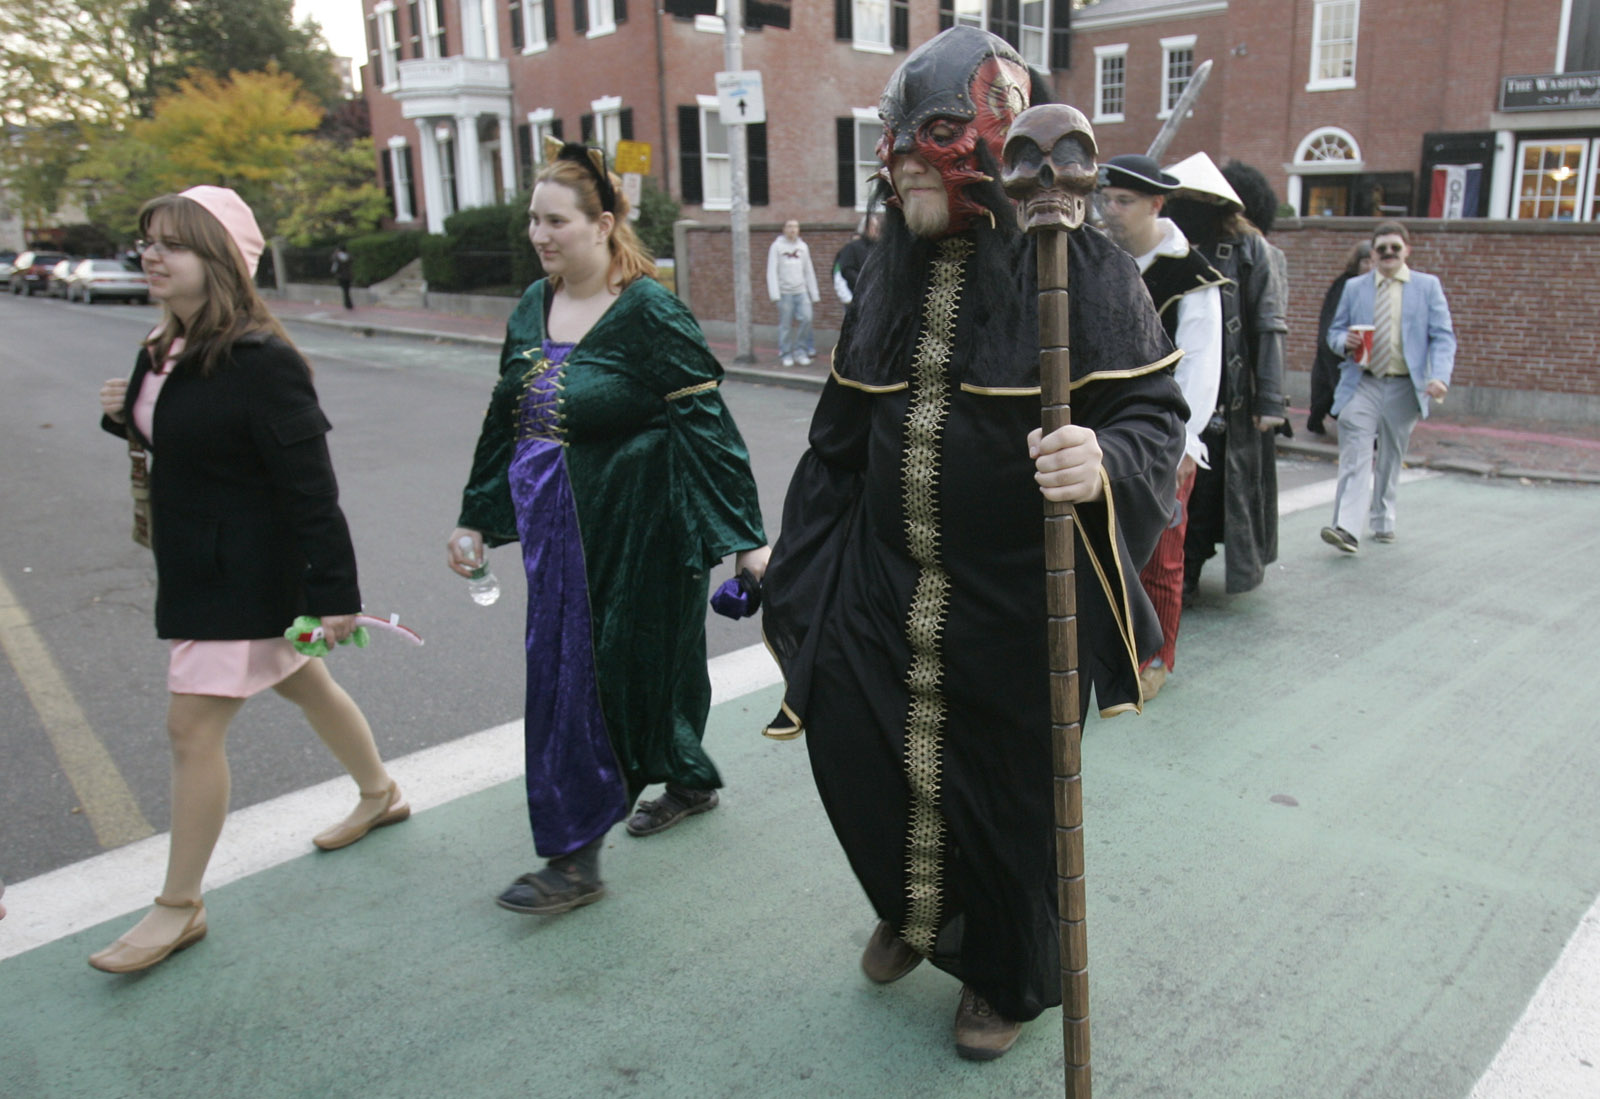 Dressed in a variety of costumes, a group crosses the street on Halloween in Salem, Mass., Wednesday Oct. 31, 2007. (AP Photo/Charles Krupa)